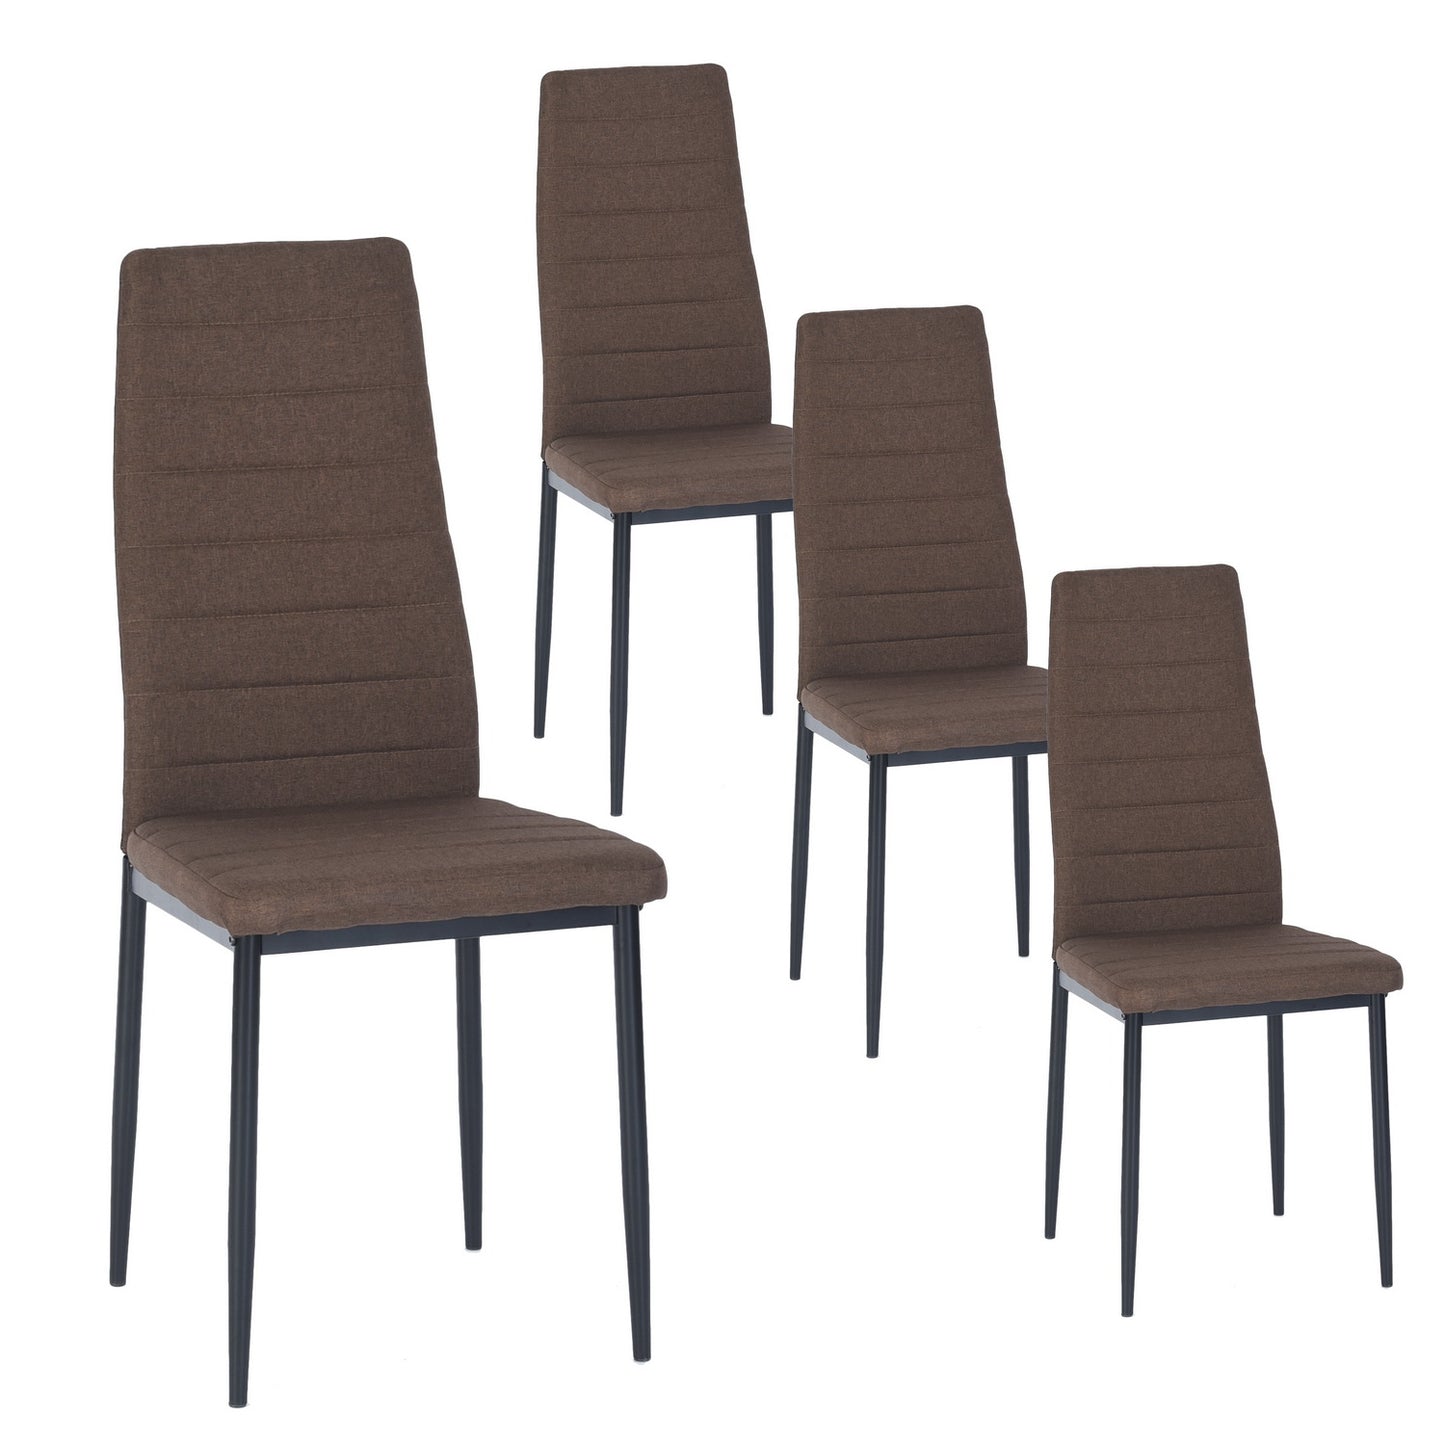 ANN Modern Upholstered Dining Chairs(Set of 4) - Beige/Brown/Gray